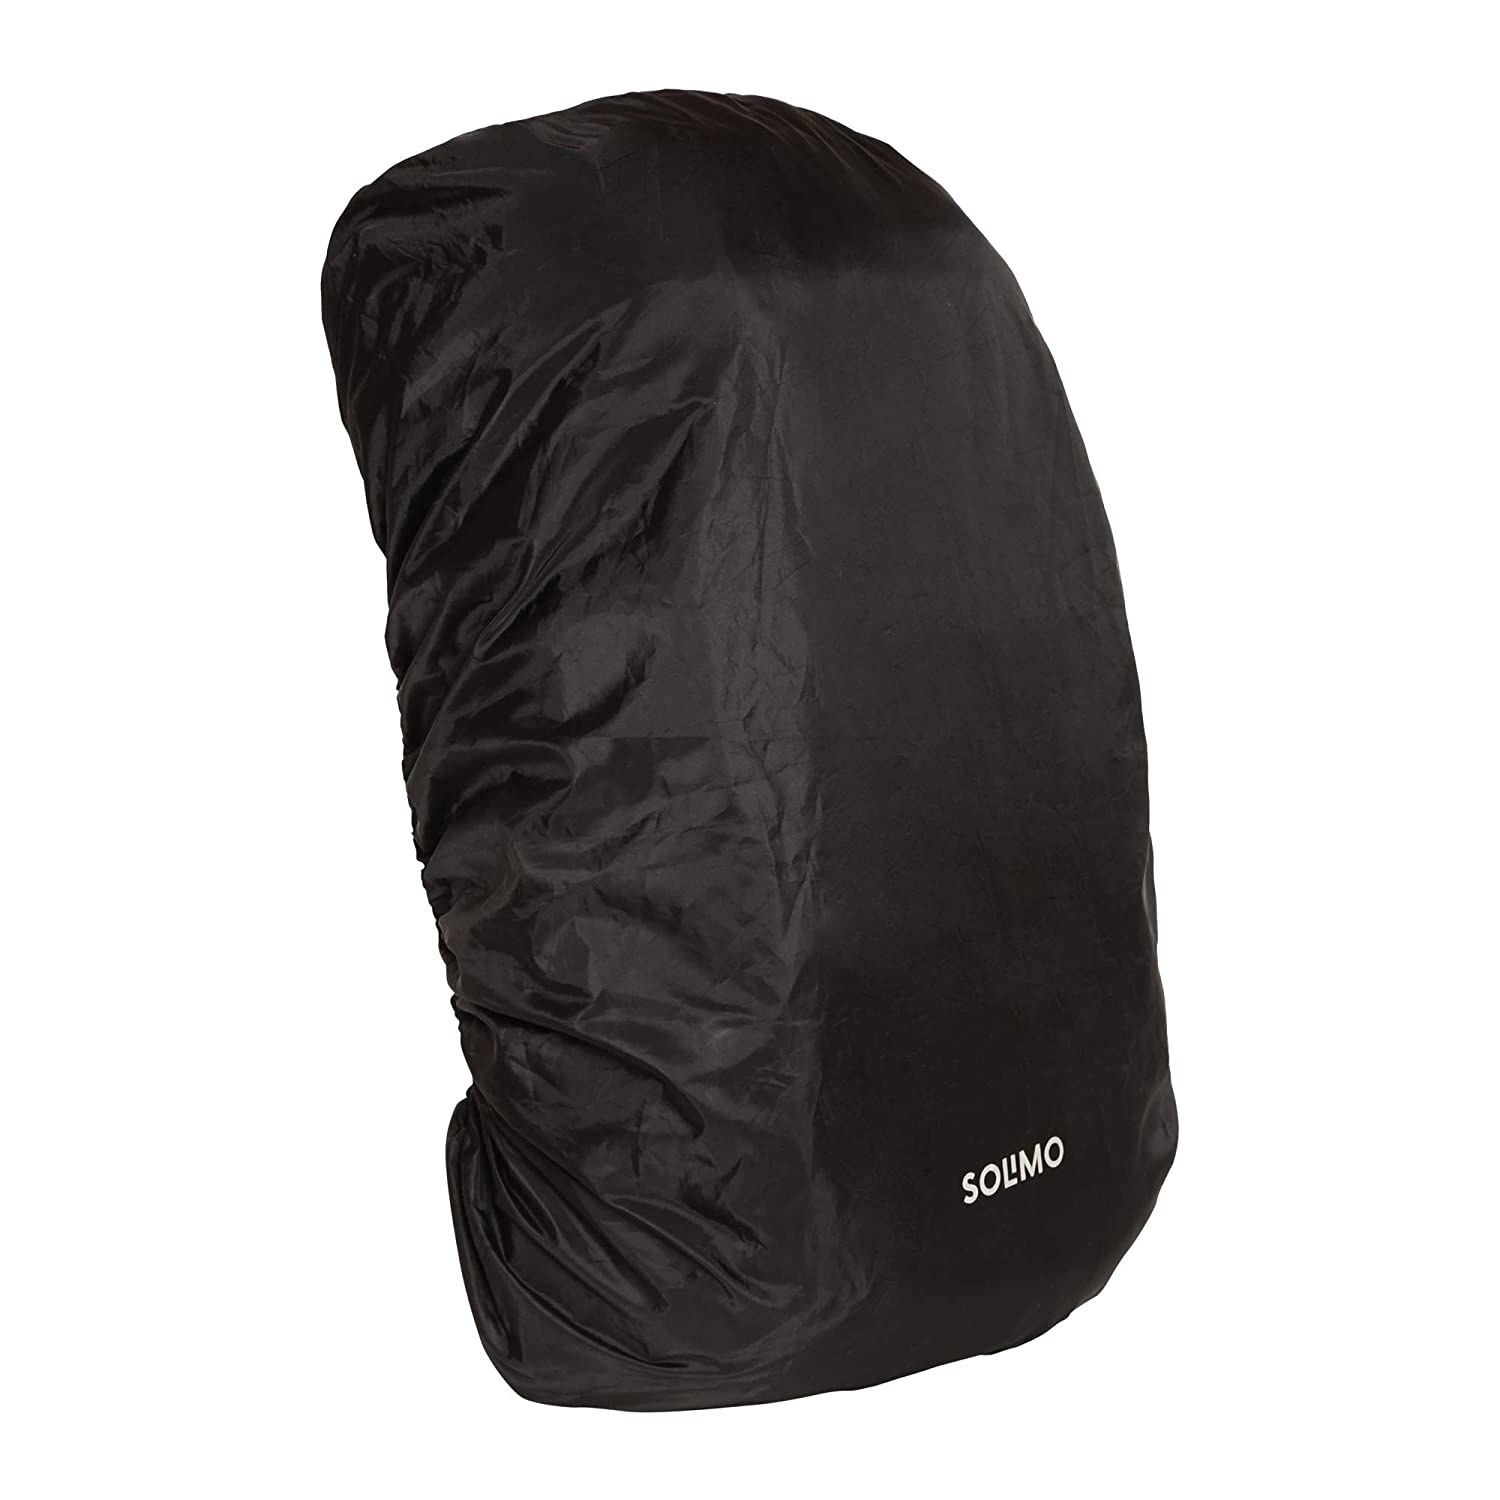 A bag with a black bag cover on it